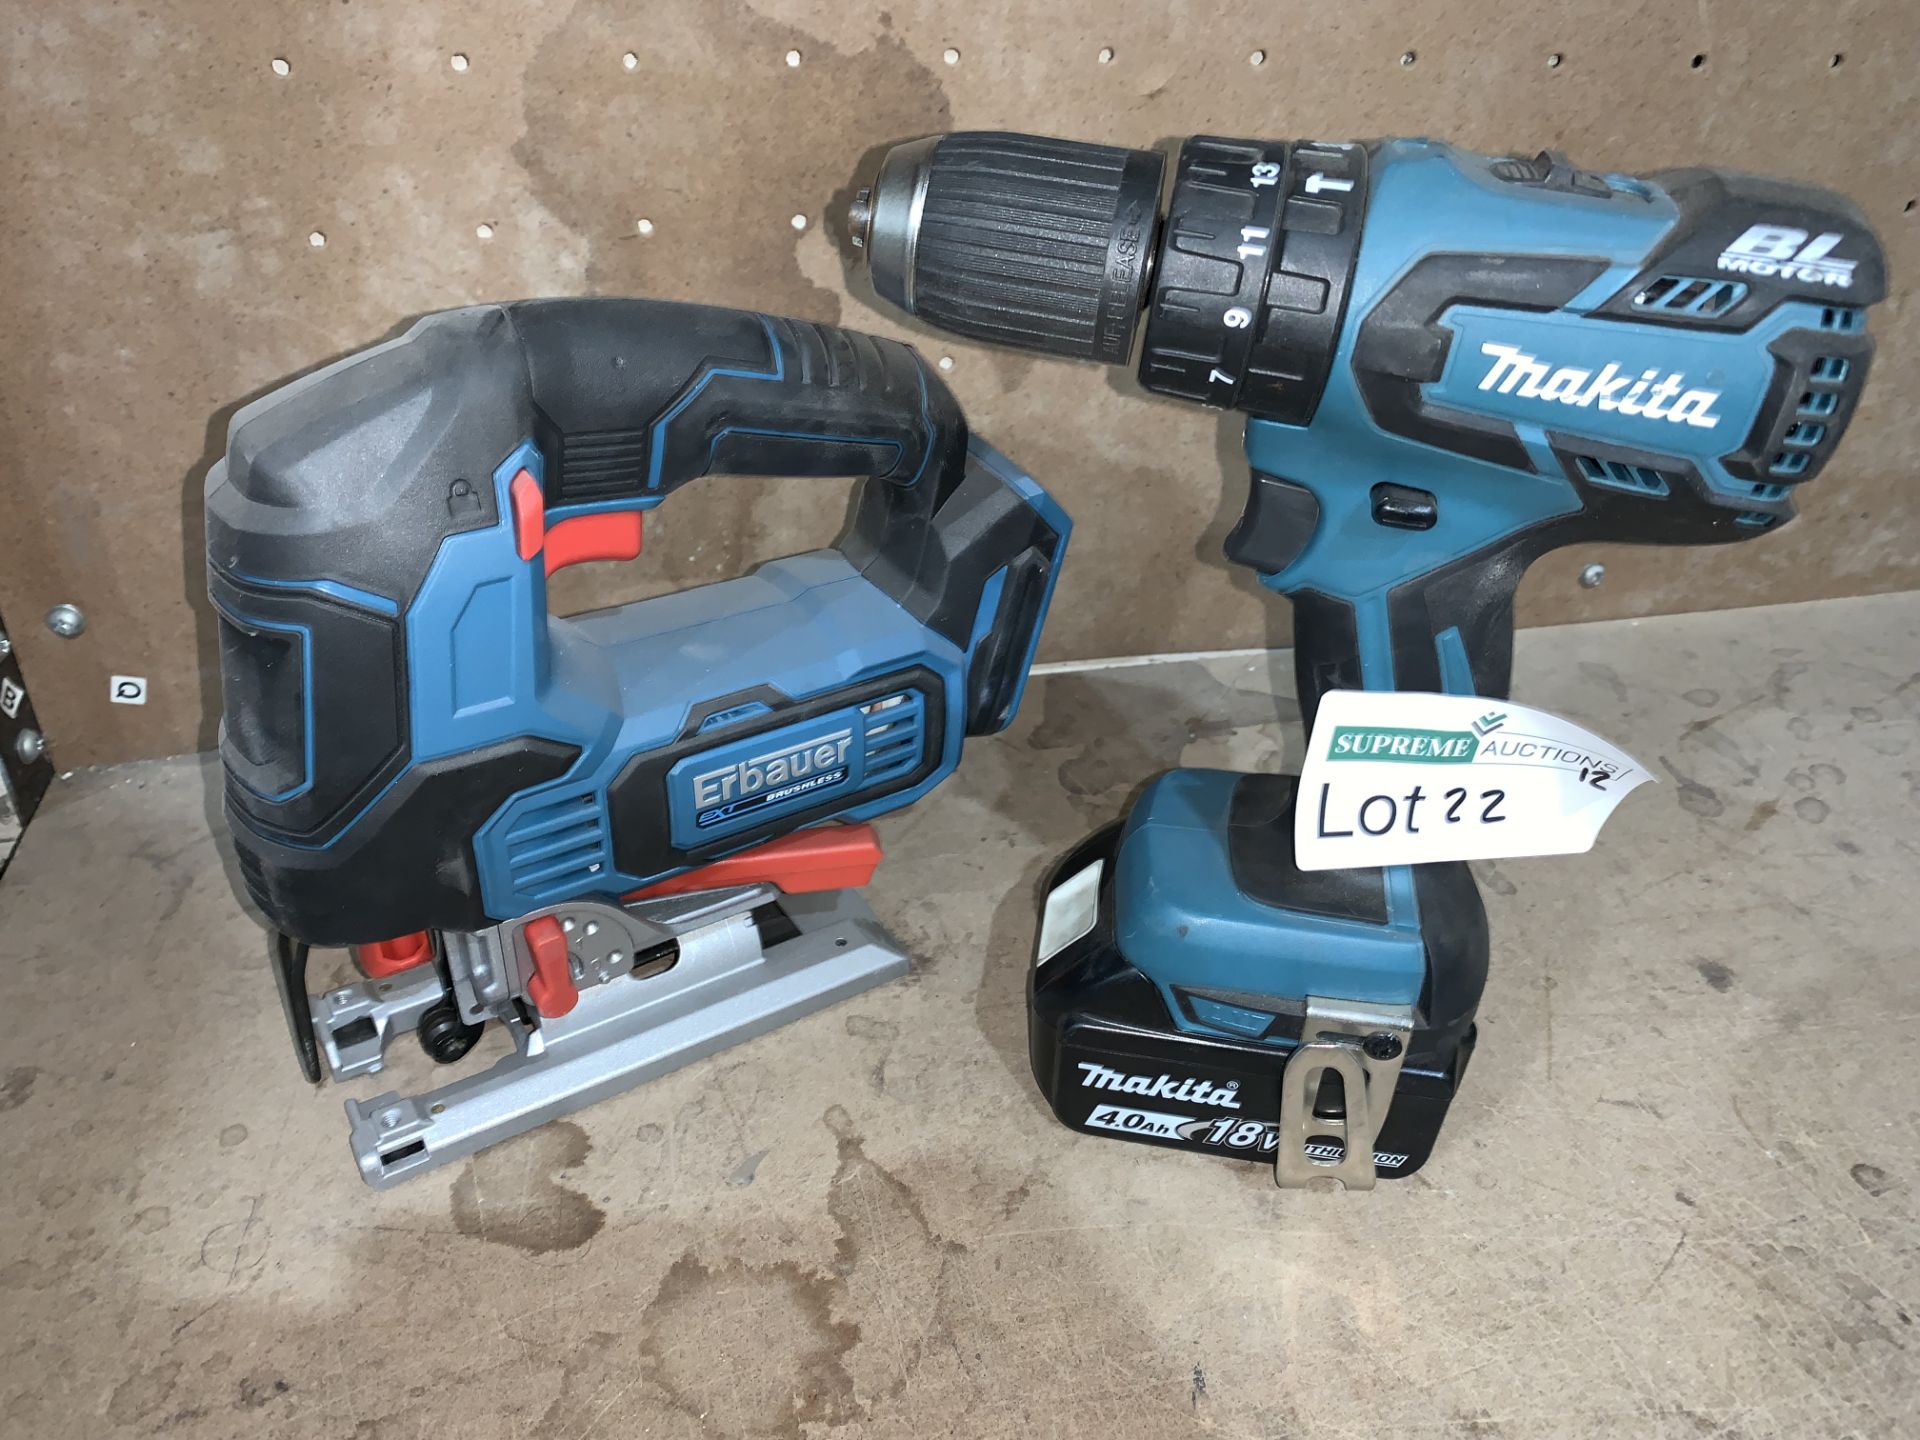 TOOL LOT INCLUDING MAKITA DRILL WITH BATTERY AND ERBAUER JIGSAW (UNCHECKED, UNTESTED) PCK